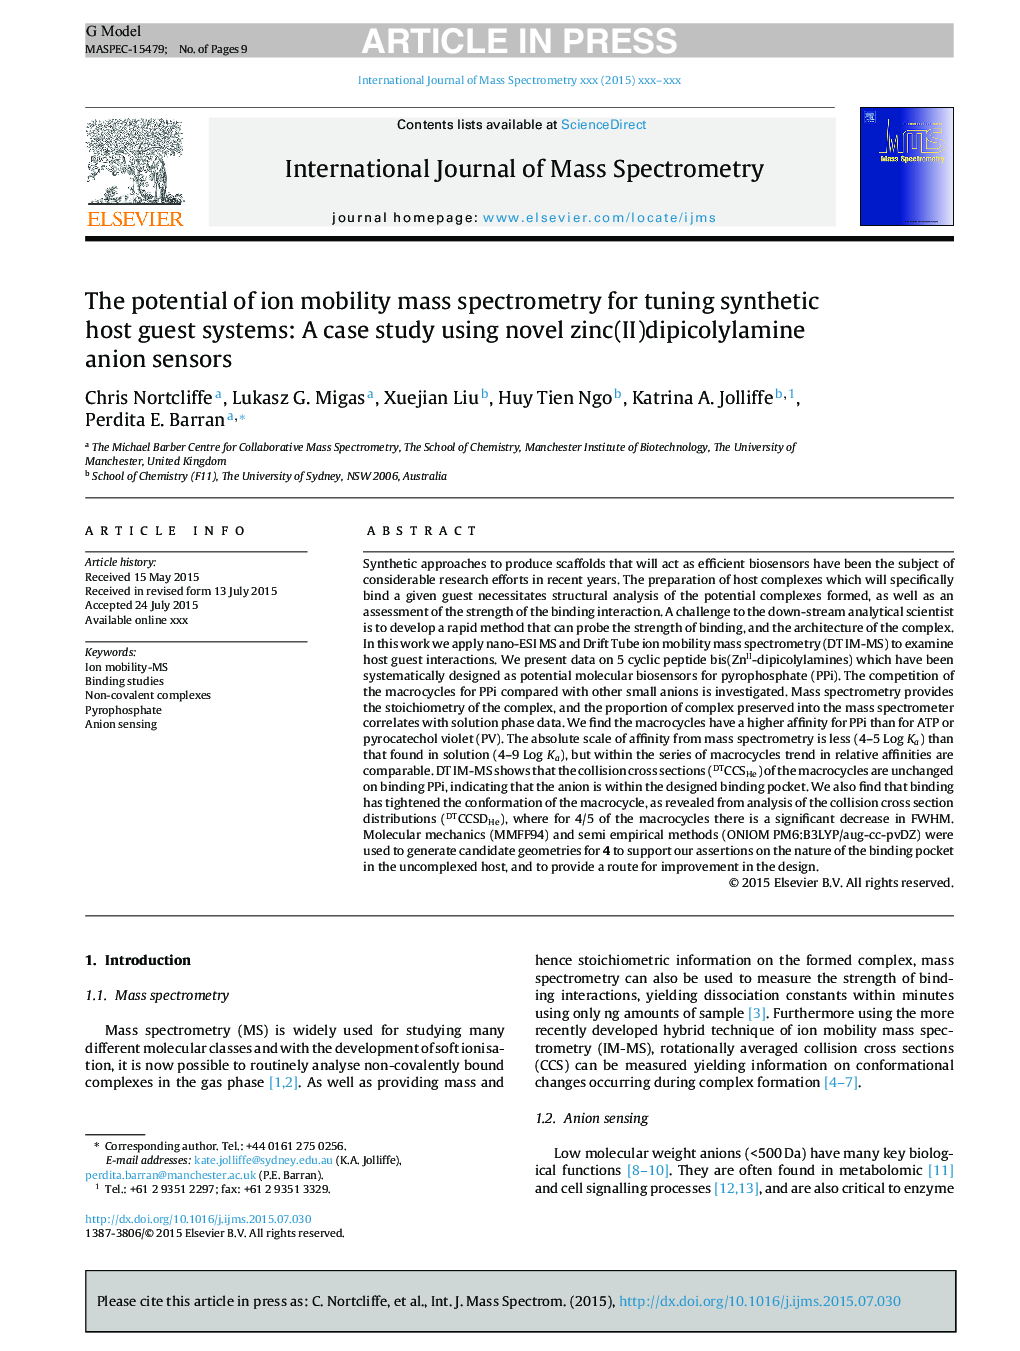 The potential of ion mobility mass spectrometry for tuning synthetic host guest systems: A case study using novel zinc(II)dipicolylamine anion sensors